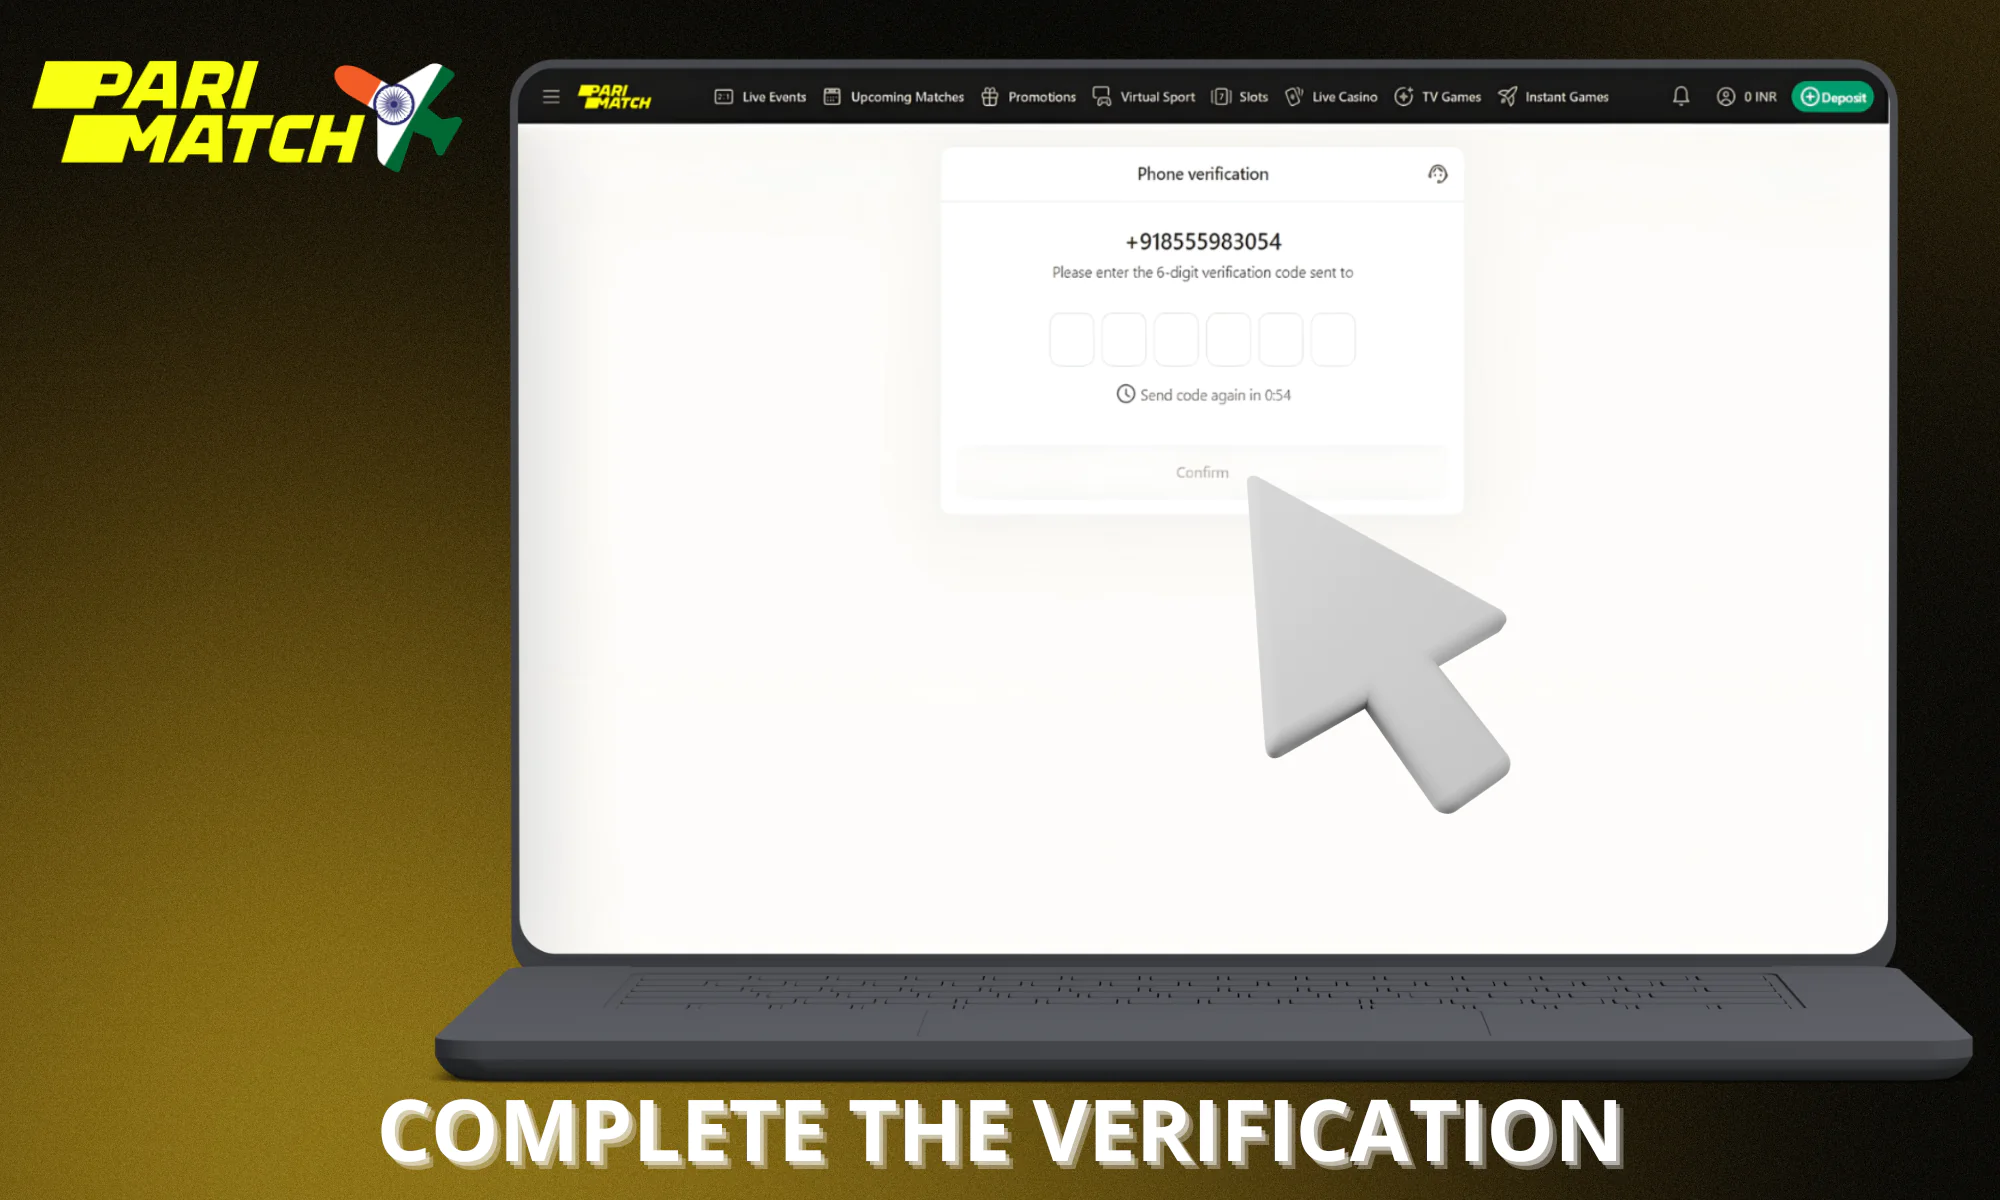 Go through the verification process and complete it